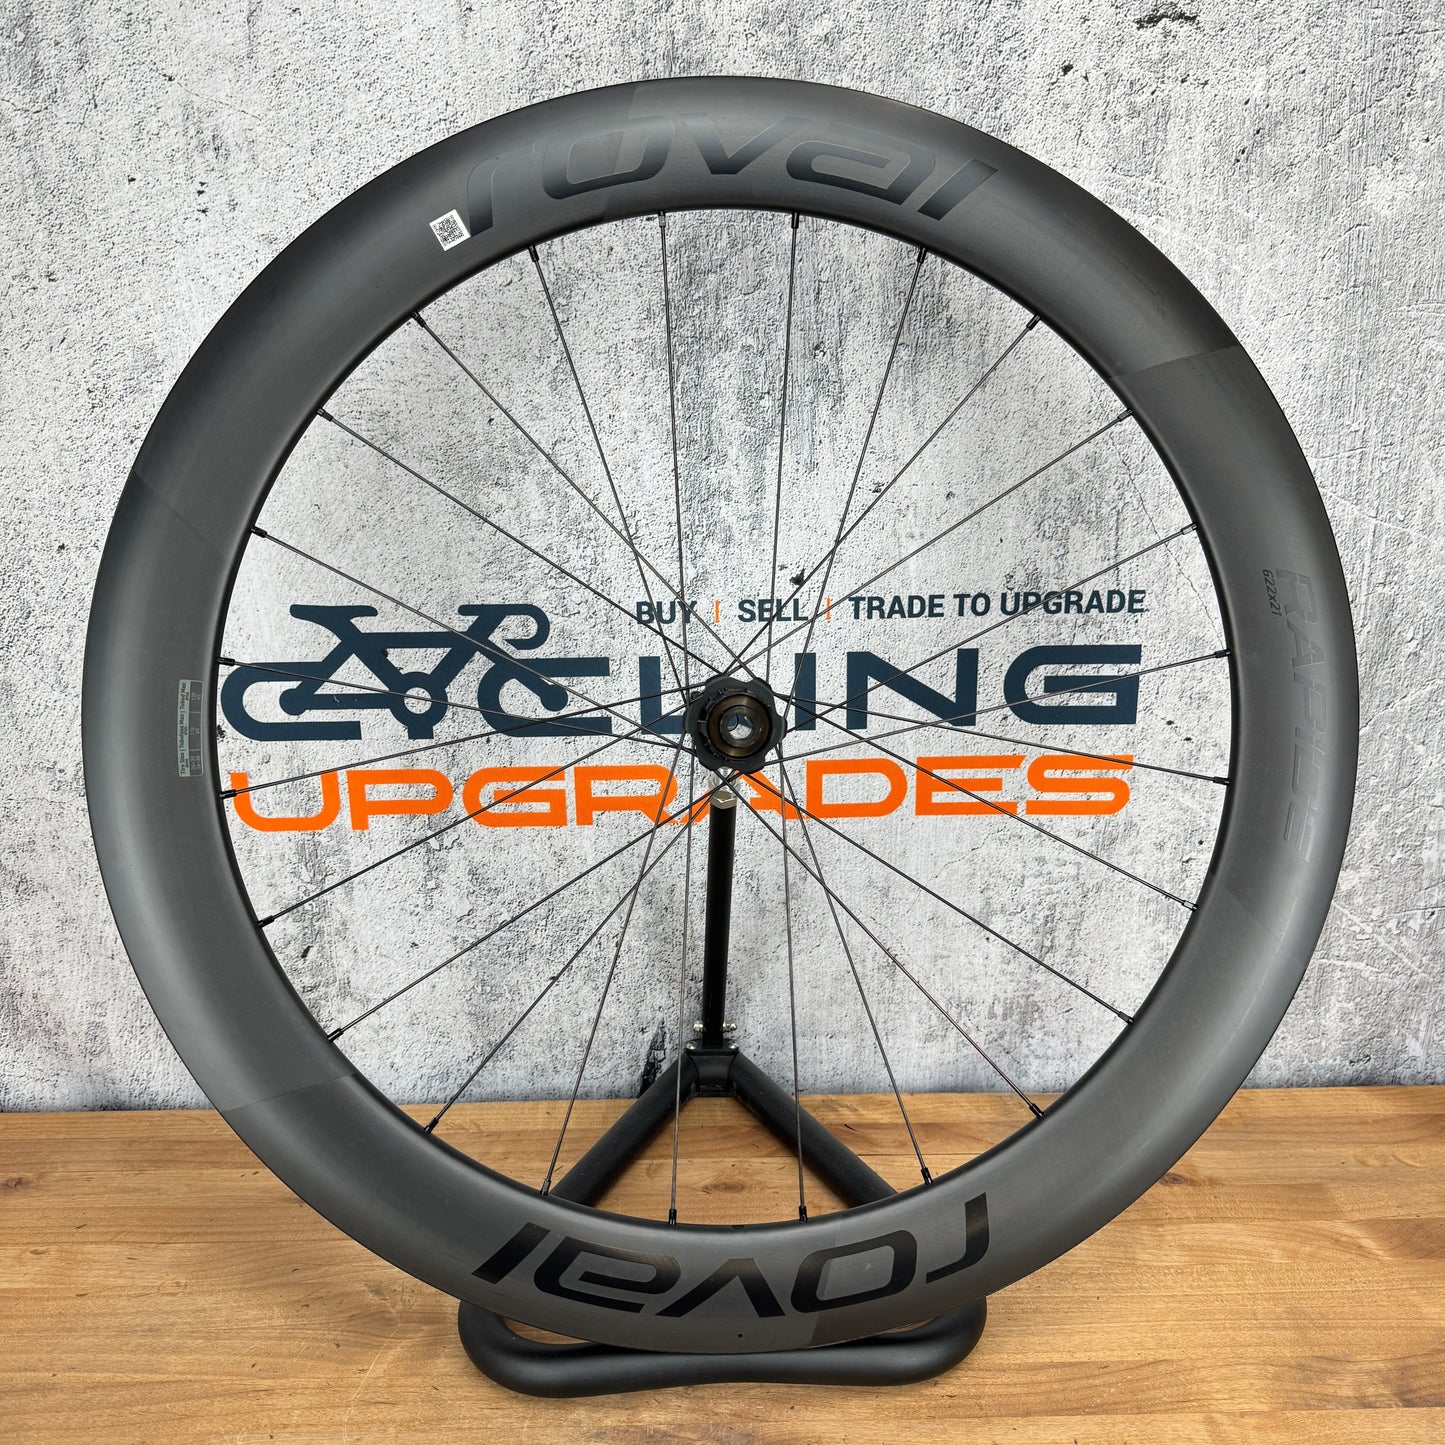 New! Roval Rapide CL II Carbon Tubeless Disc Rear Wheel 700c 848g